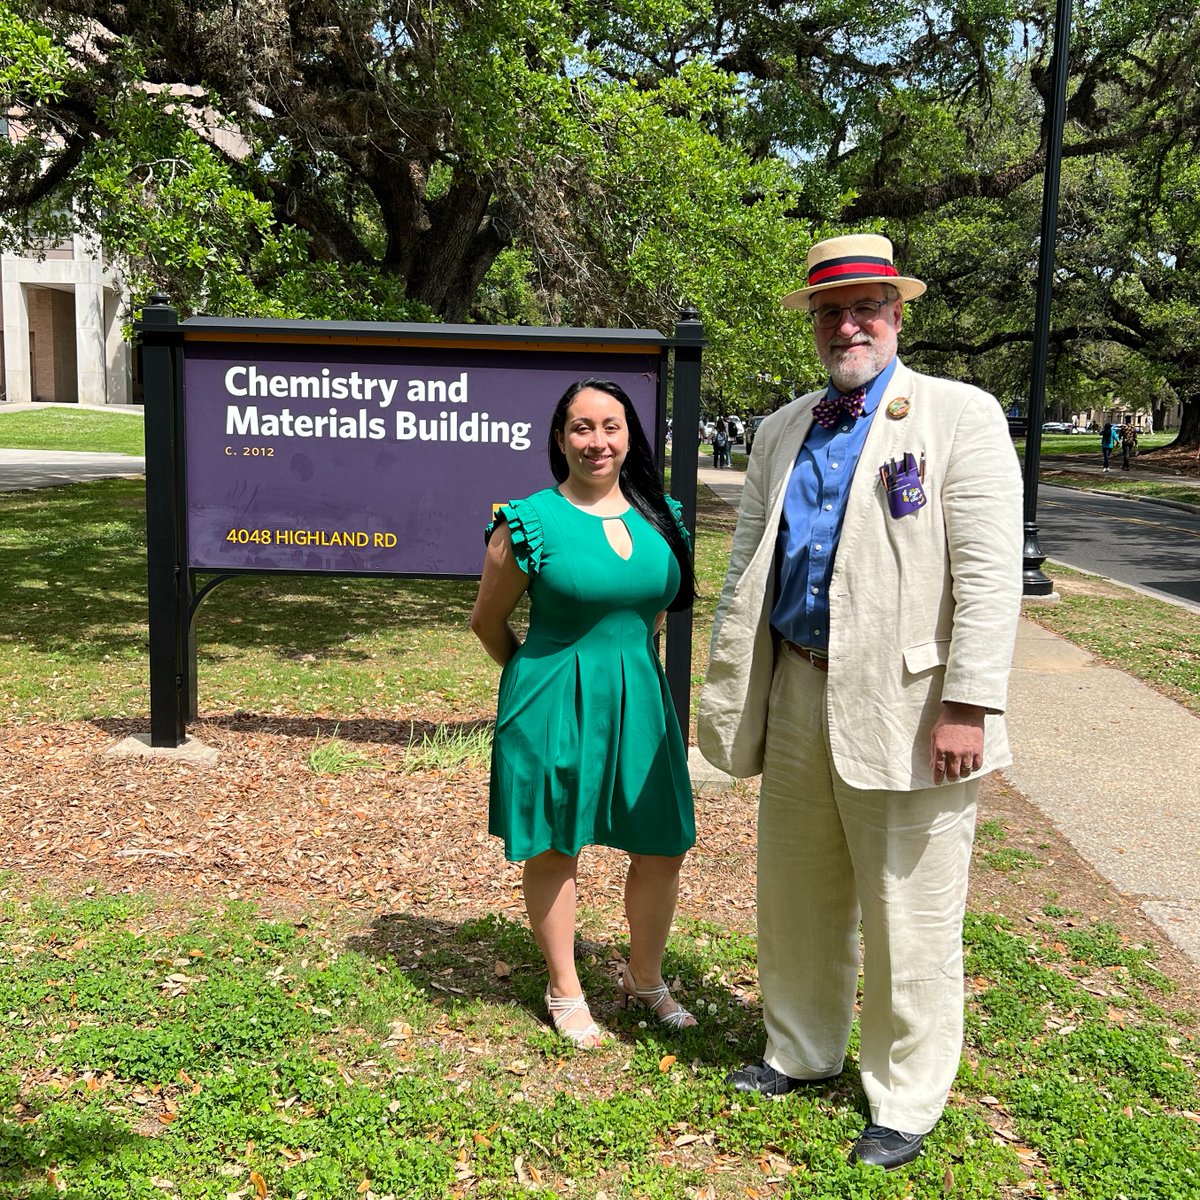 Congratulations to #LSUChemistry graduate student Maria Martinez for successfully defending her #PhD dissertation. Maria worked under the guidance of Professor John Pojman.